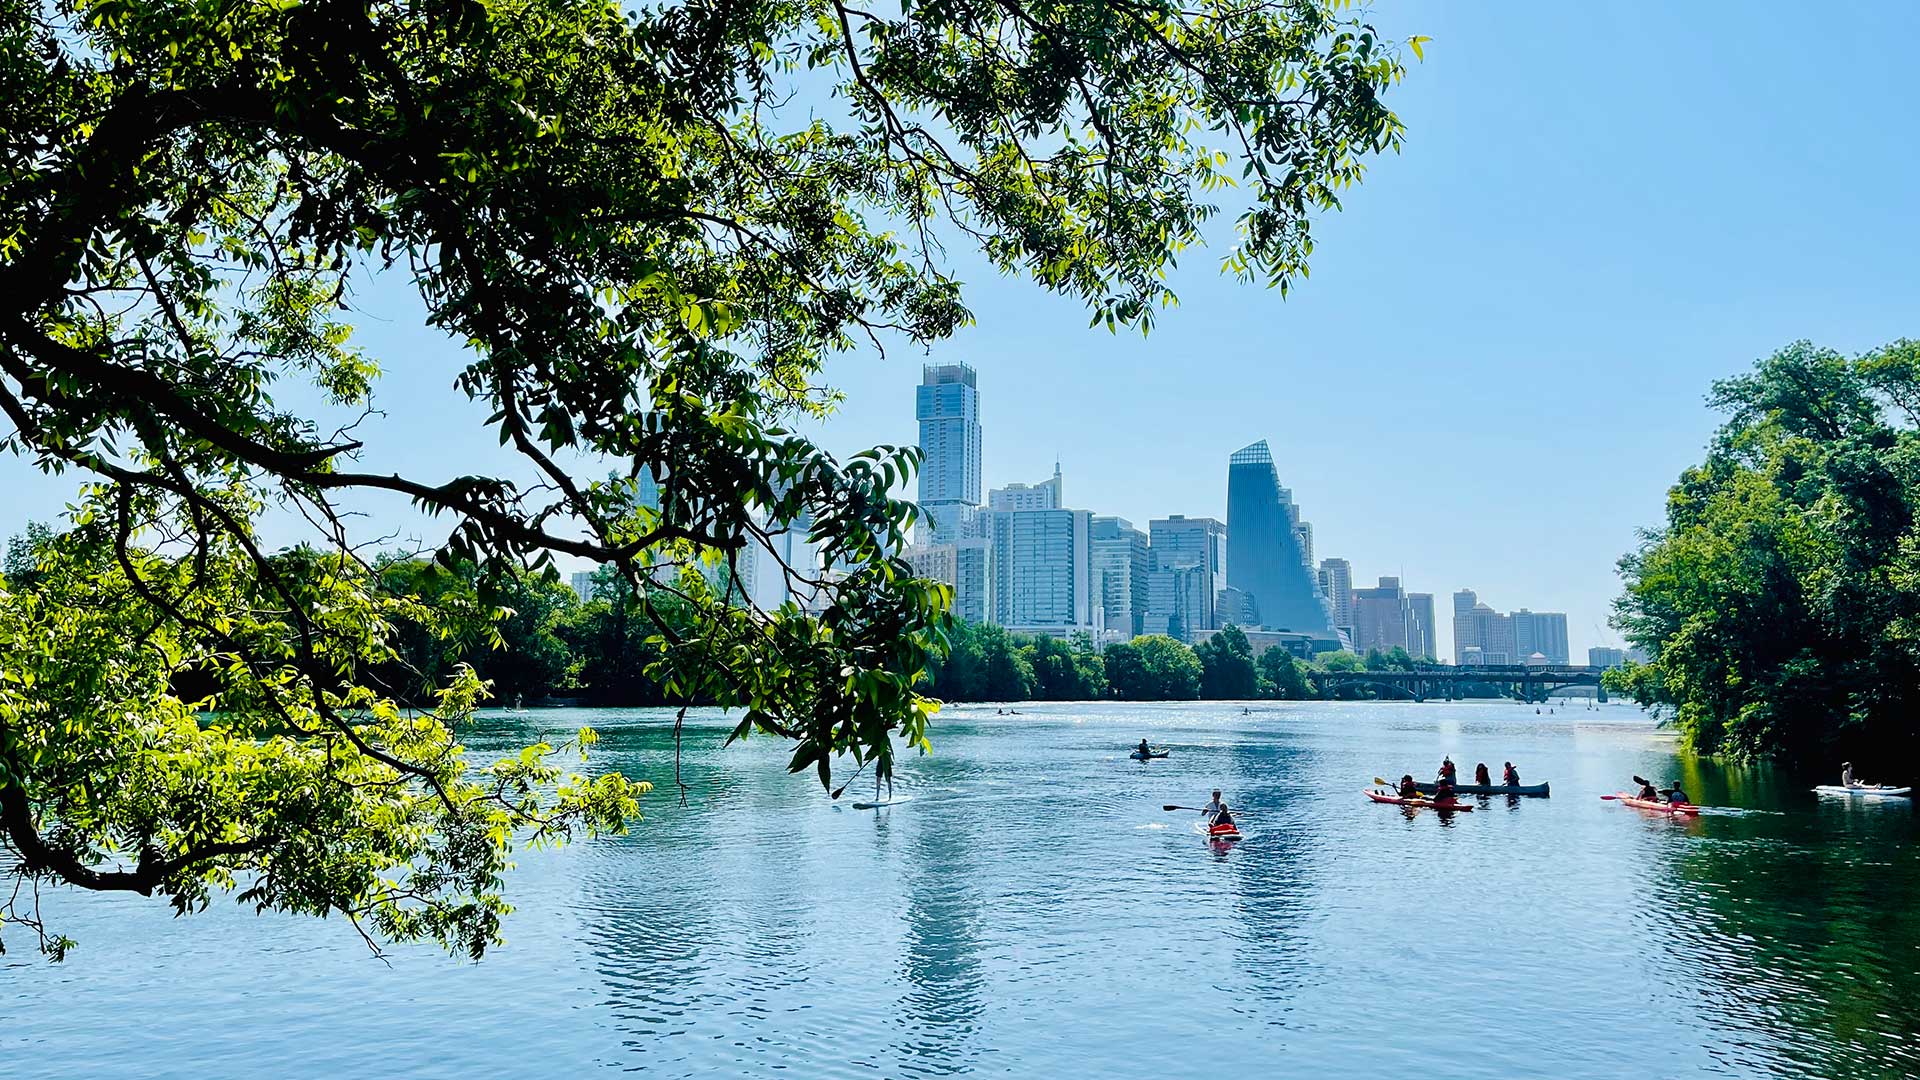 People canoeing in the Colorado River with the Austin skyline in the background.